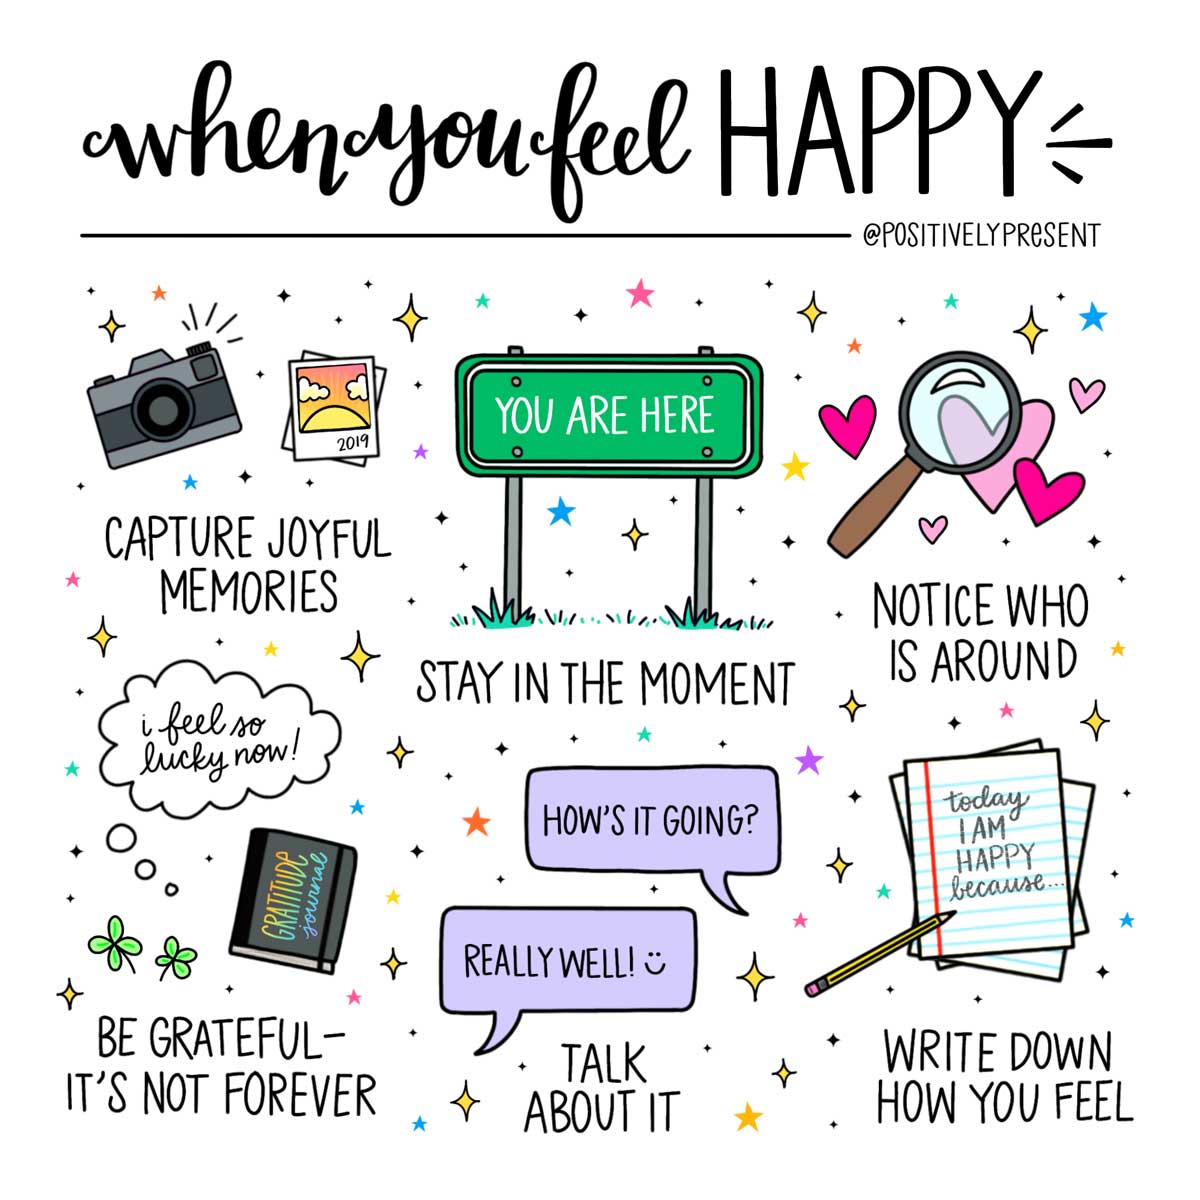 cute illustrations expressing ideas of what to do when you feel happy.